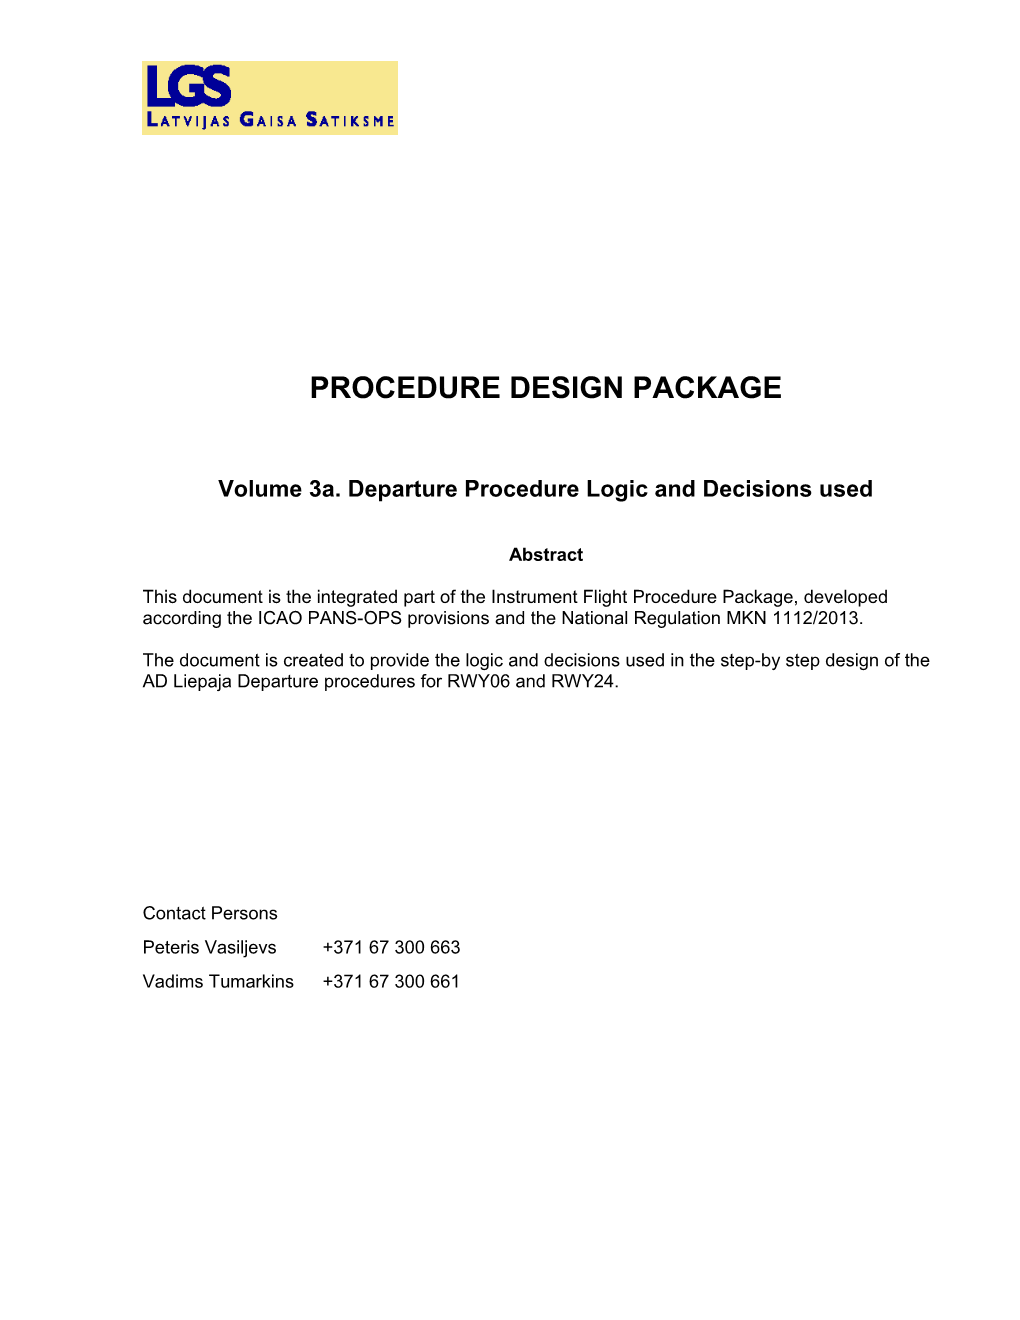 Volume 3A. Departure Procedure Logic and Decisions Used